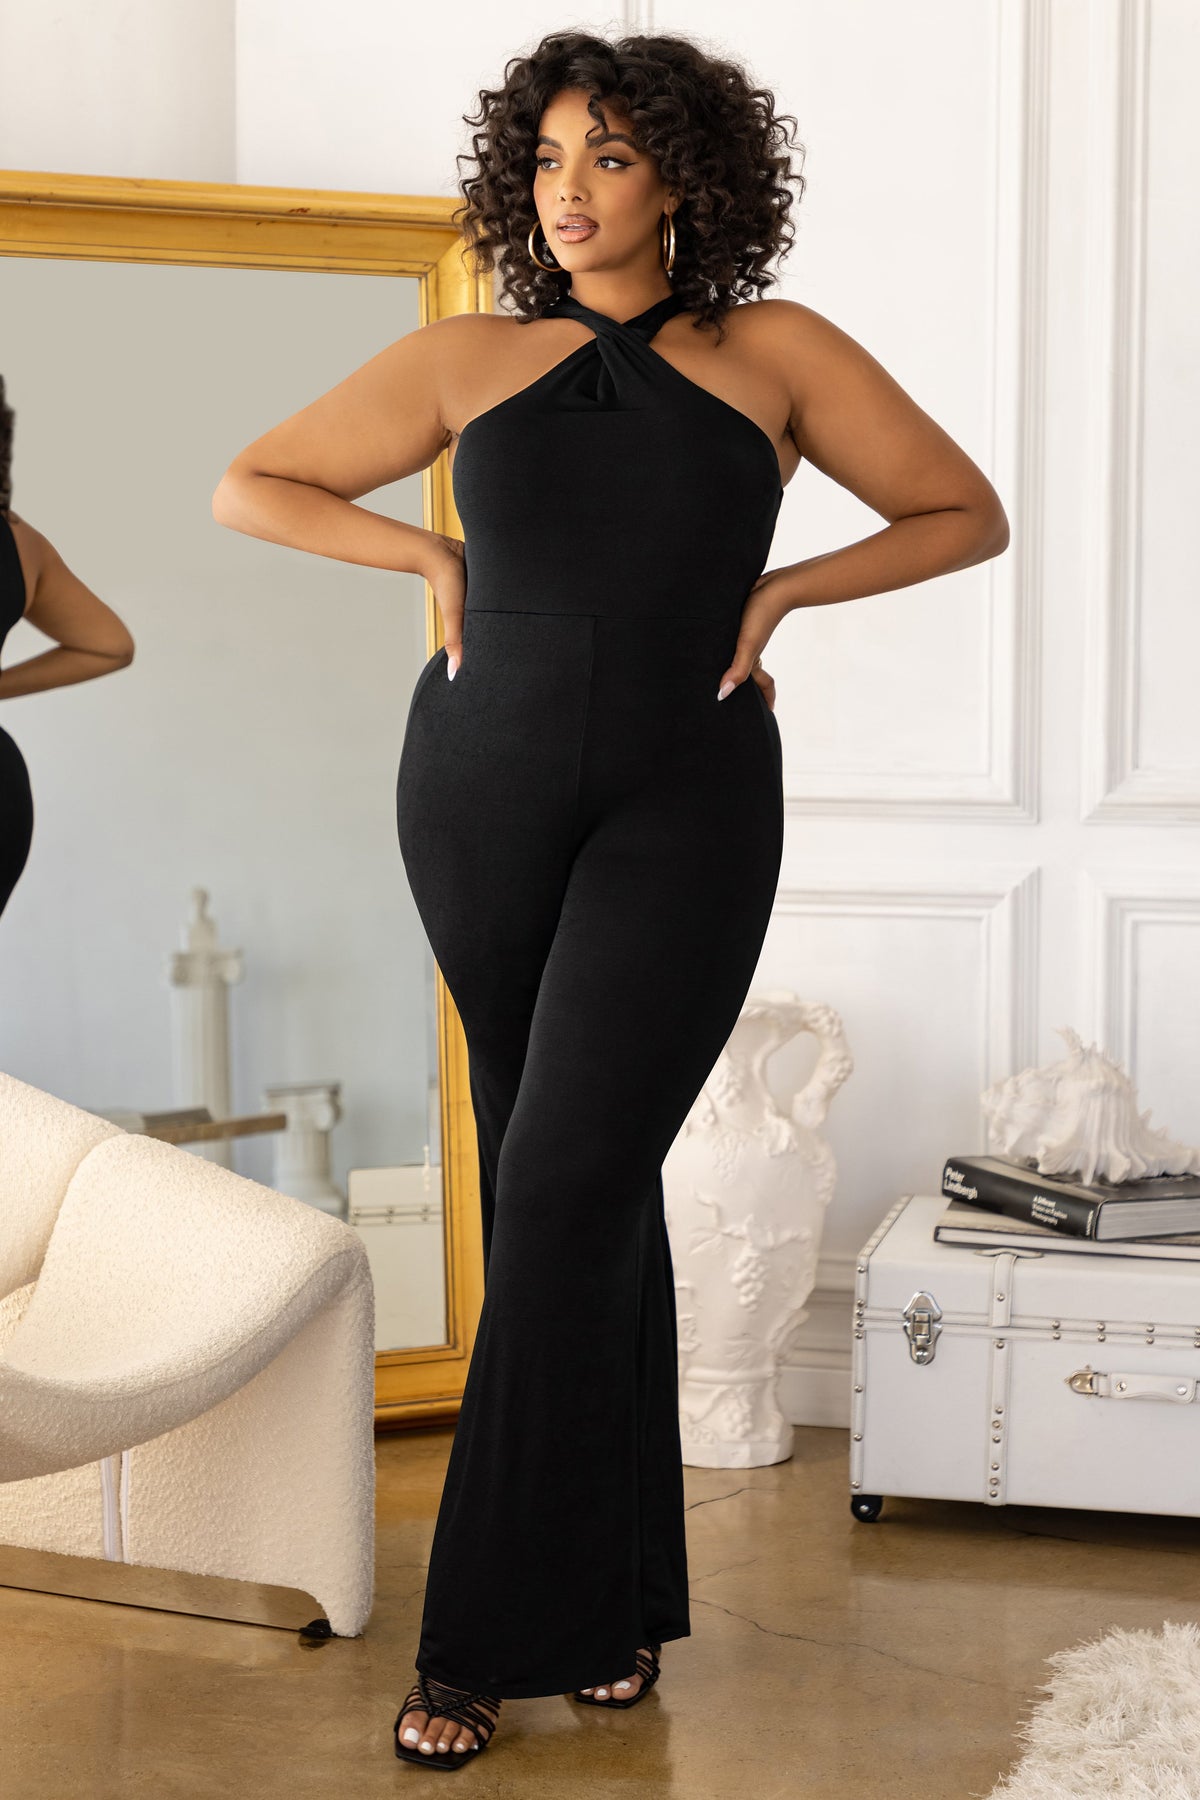 Xysaqa Plus Size Jumpsuit for Curvy Women, Womens Casual Bodycon Tank  One-Piece Jumpsuits Spaghetti Strap Sleeveless Fit Rompers Playsuit with  Pockets 